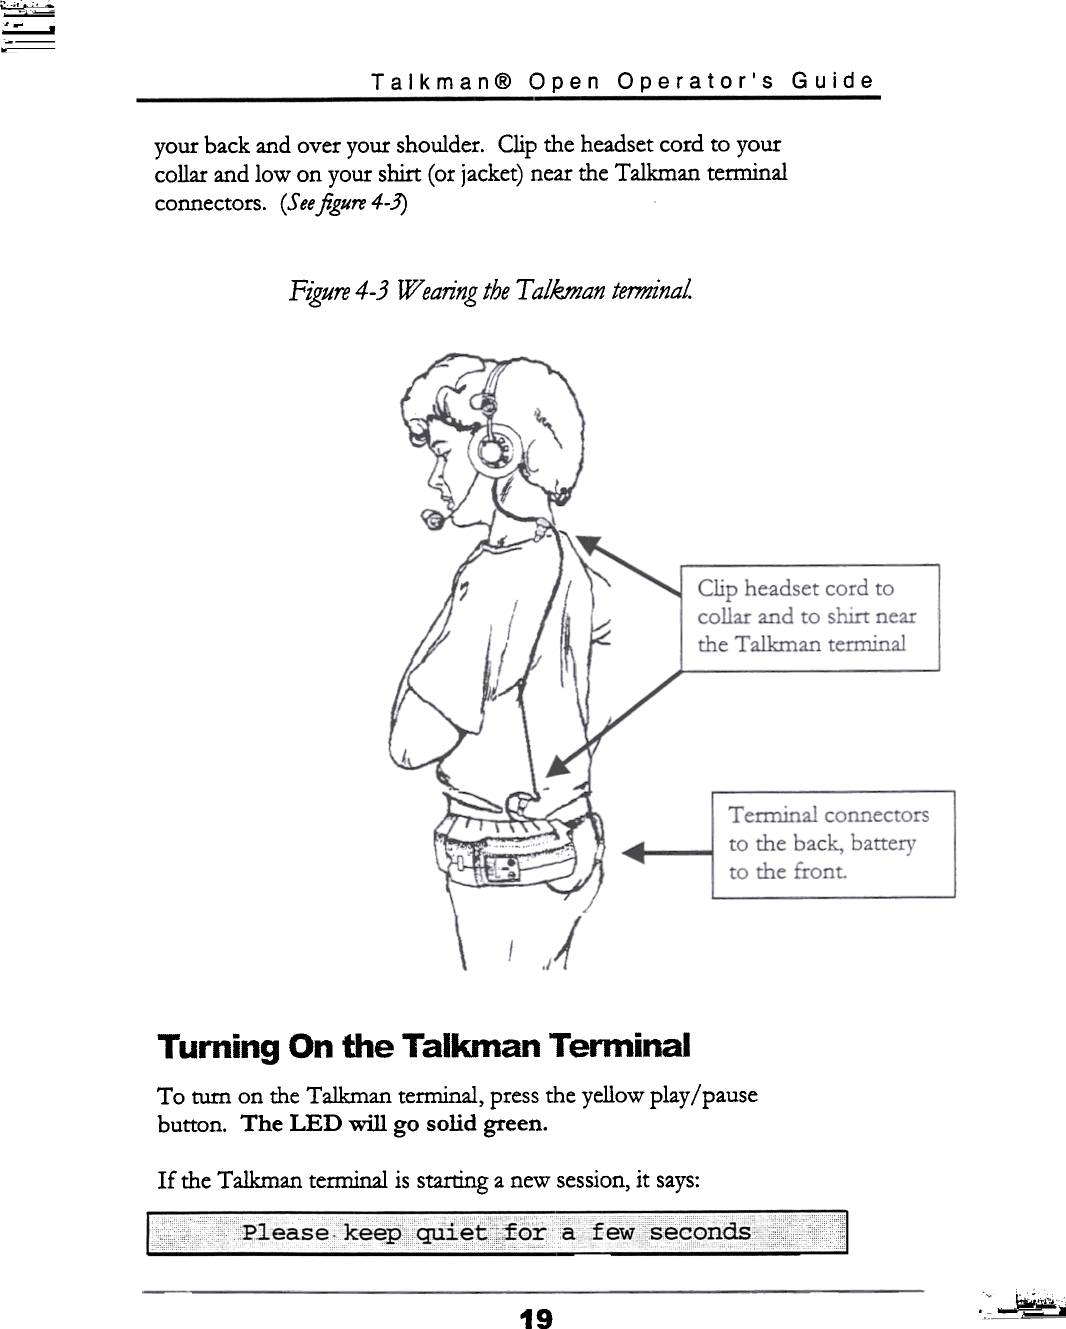 ;\~~ic;~~~~c,Talkman@  Open  Operator&apos;s  Guideyour  back and over your  shoulder.  Clip  the headset cord  to yourcollar  and low  on your  shirt  (or jacket) near the Talkman  terminalconnectors.  (Seeftgure4-3)Figure 4- 3  Wearing the T alkman  terminalTurning  On  the  Talkman  TerminalTo  turn  on the Talkman  terminal,  press the yellow  play / pausebutton.  The  LED  will  go  solid  green.If  the Talkman  terminal  is starting a new session, it  says:c  ---,  ~~-  c  c  -!&quot;hC  ~,;;19